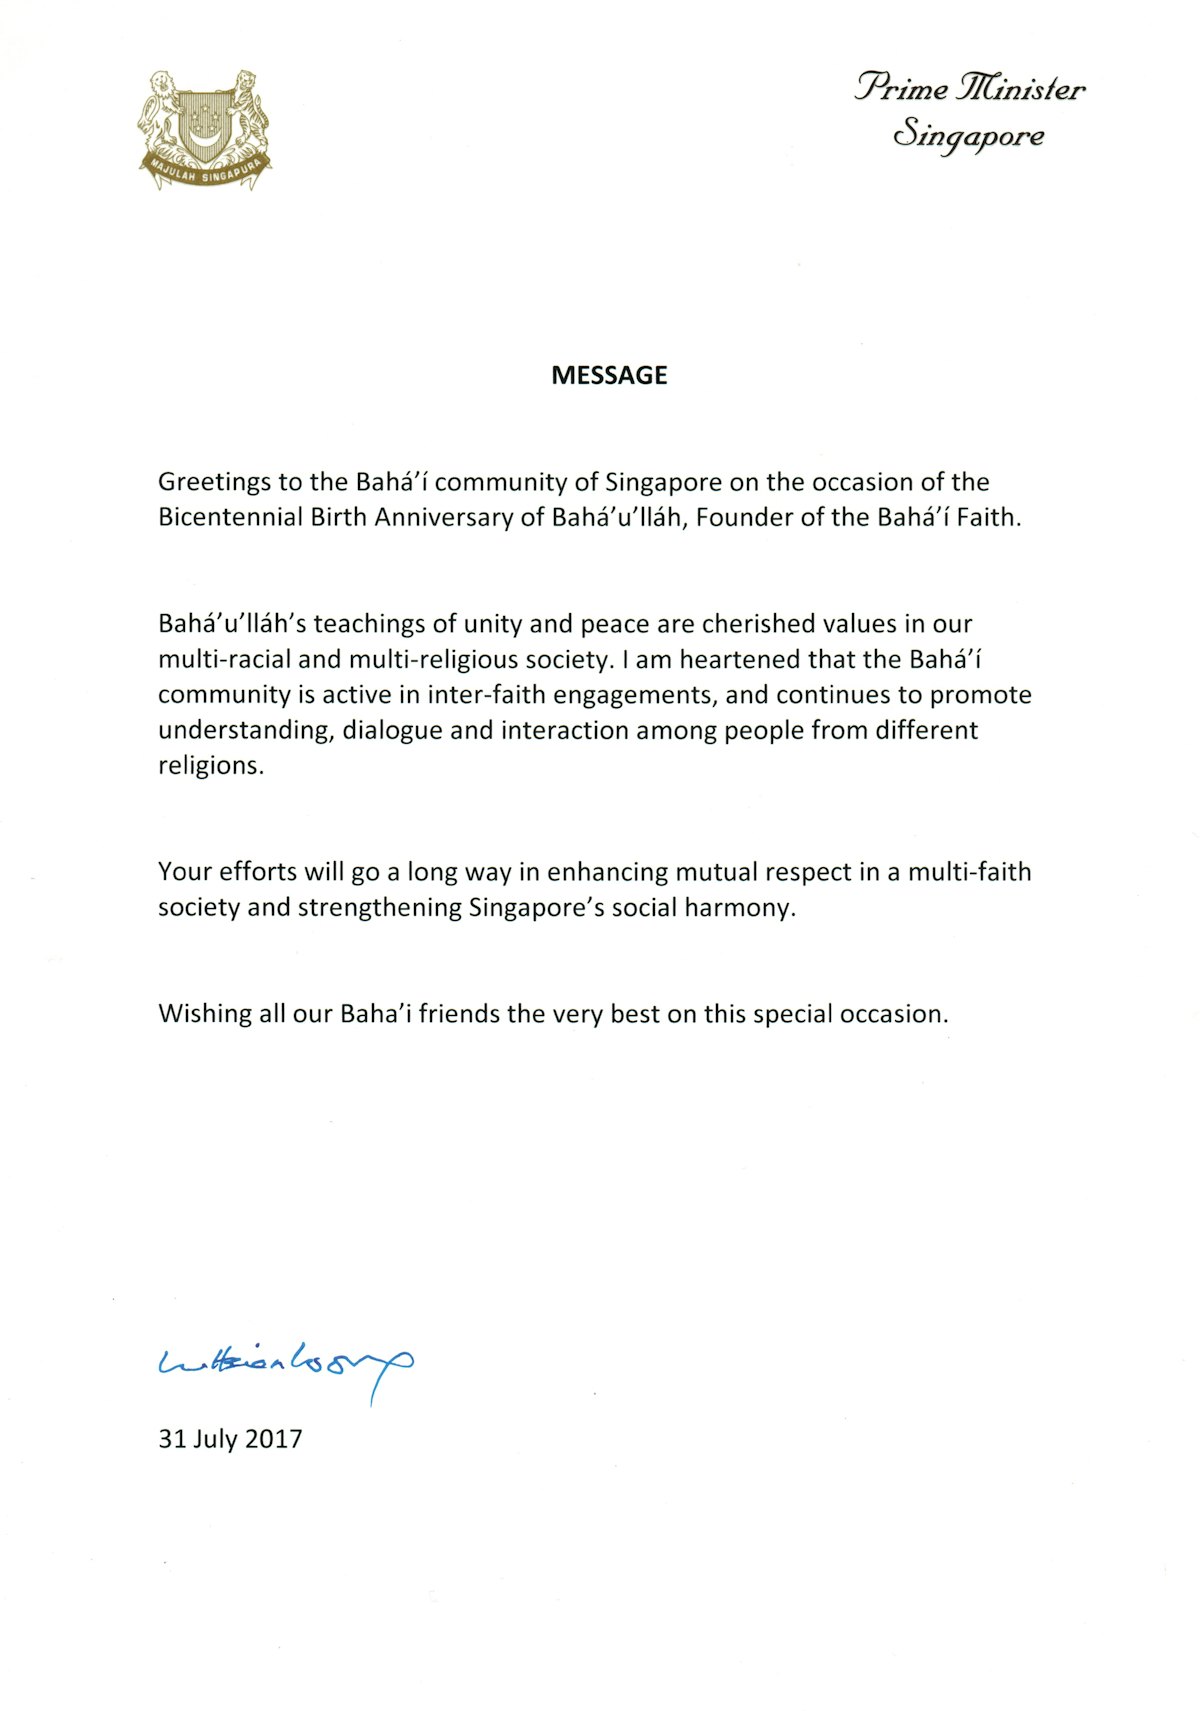 A copy of the letter dated 31 July 2017 from Prime Minister Lee Hsien Loong